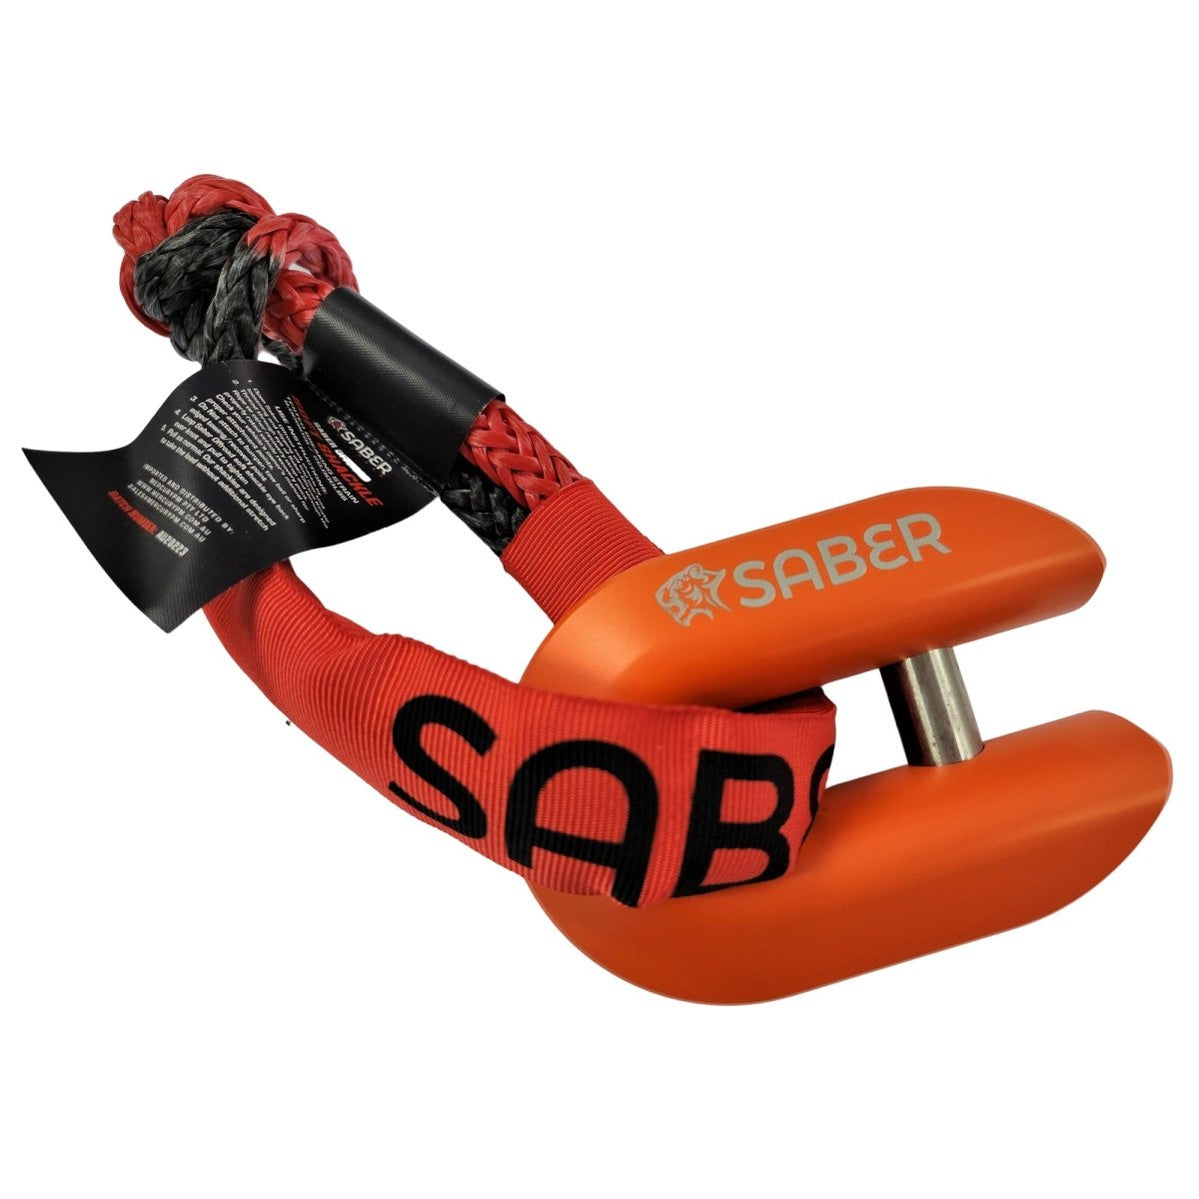 Saber Alloy Winch Shackle | Saber Offroad | A247 Gear